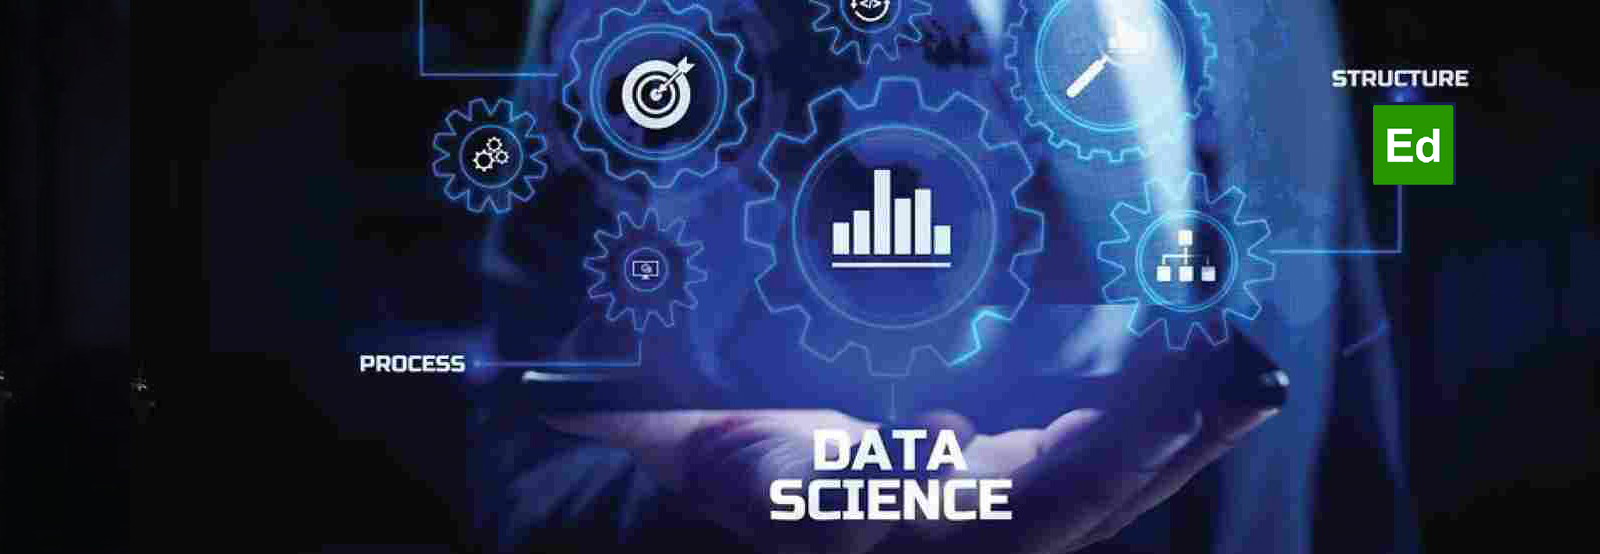 Importance of Data Science for Managers 